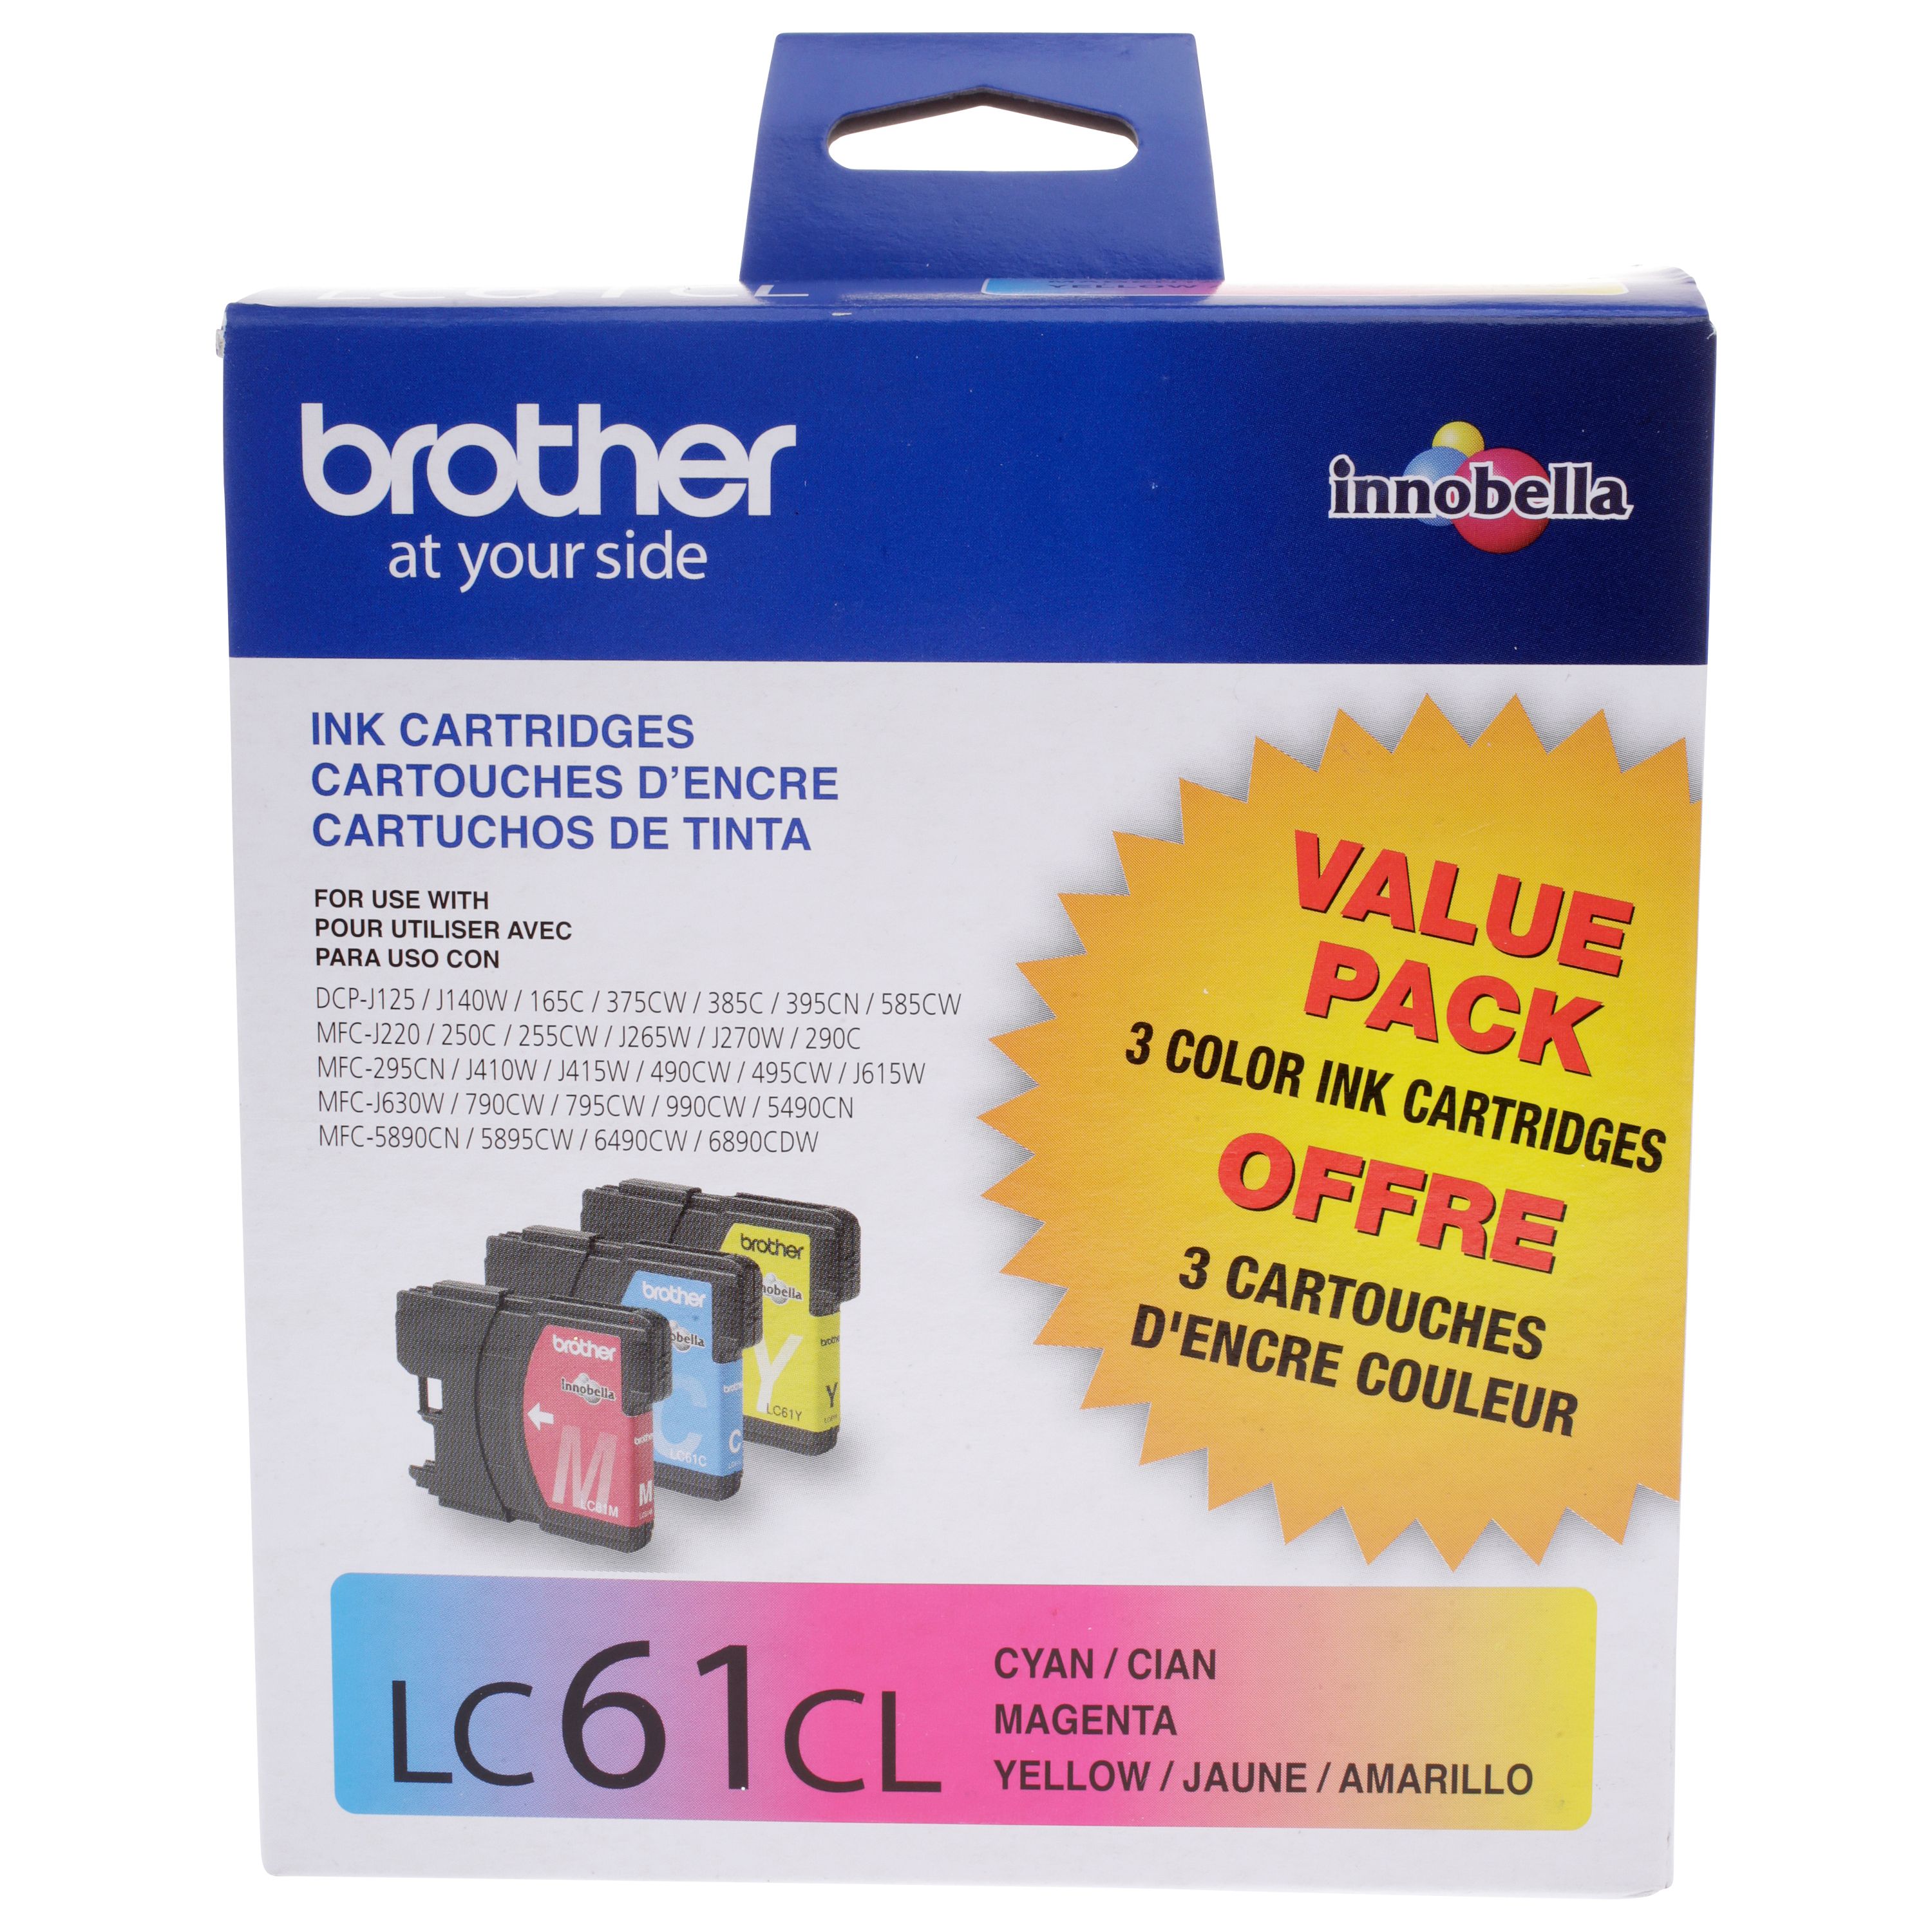 Brother Genuine Standard-yield Color Printer Ink Cartridges, LC613PKW - image 1 of 6